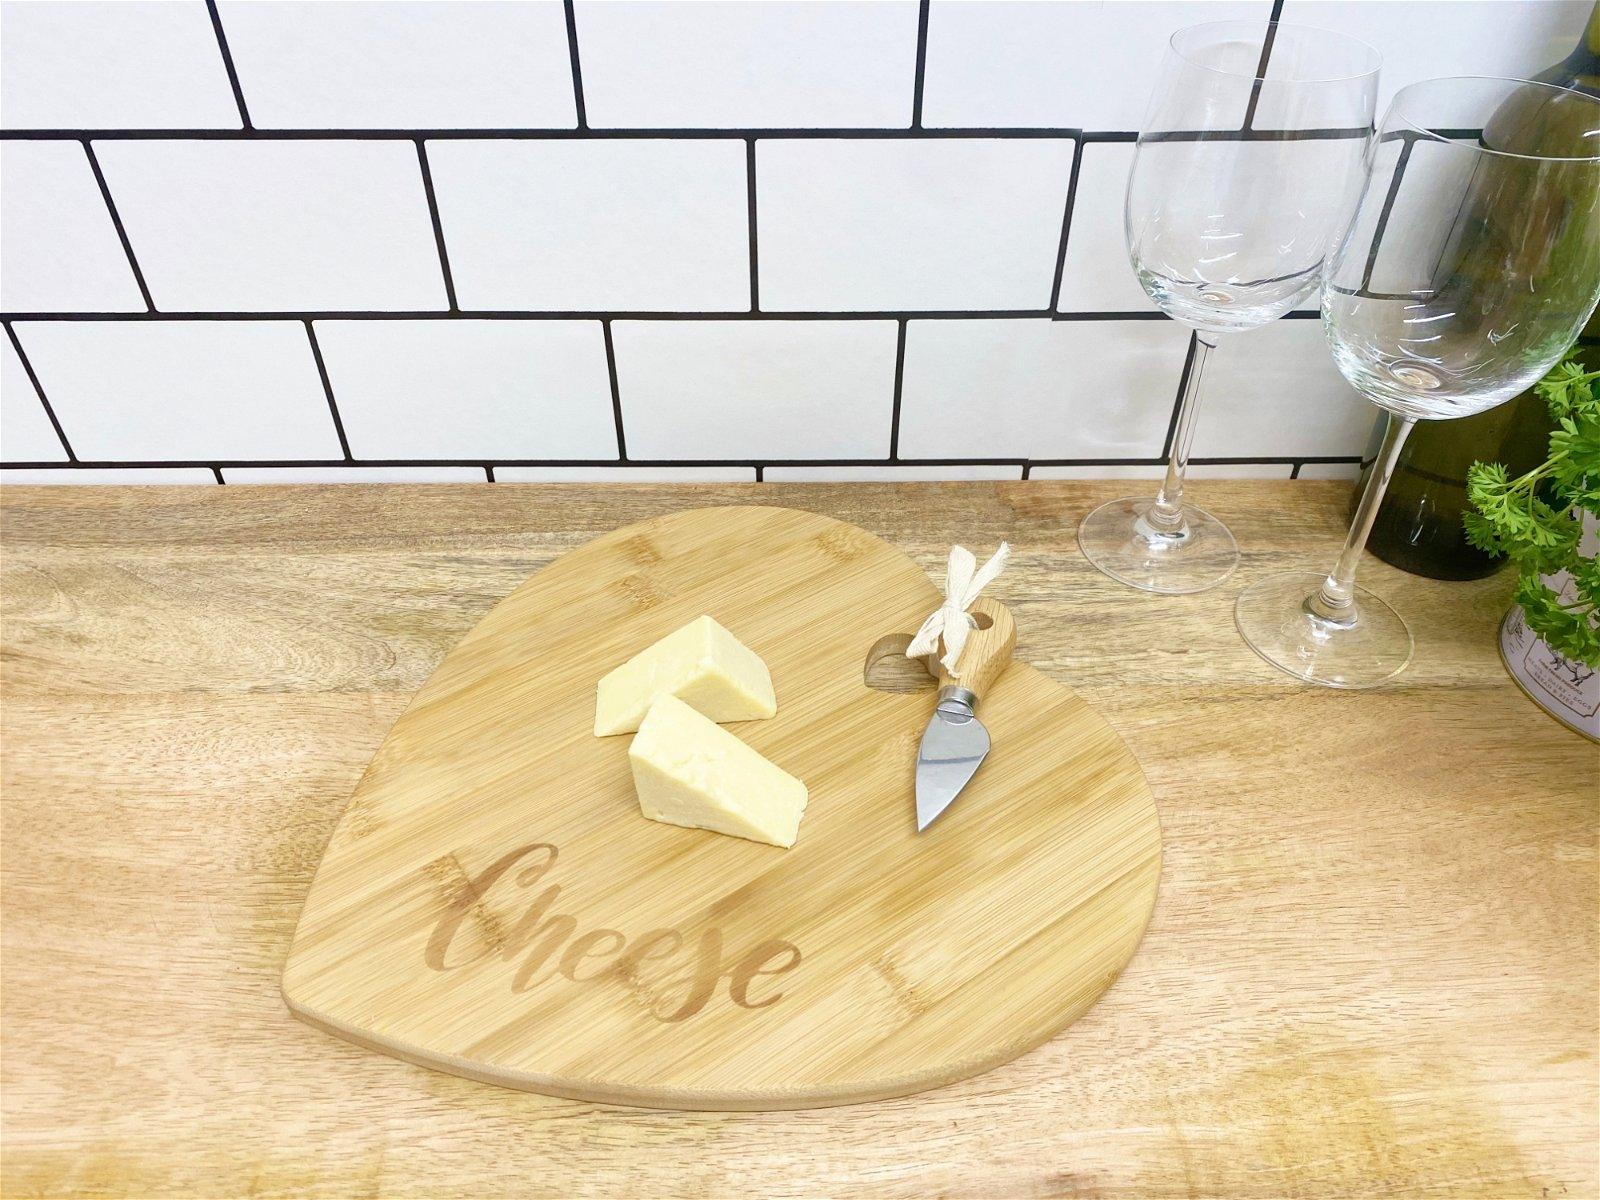 Heart Shaped Cheese Board with Knife - £25.99 - 